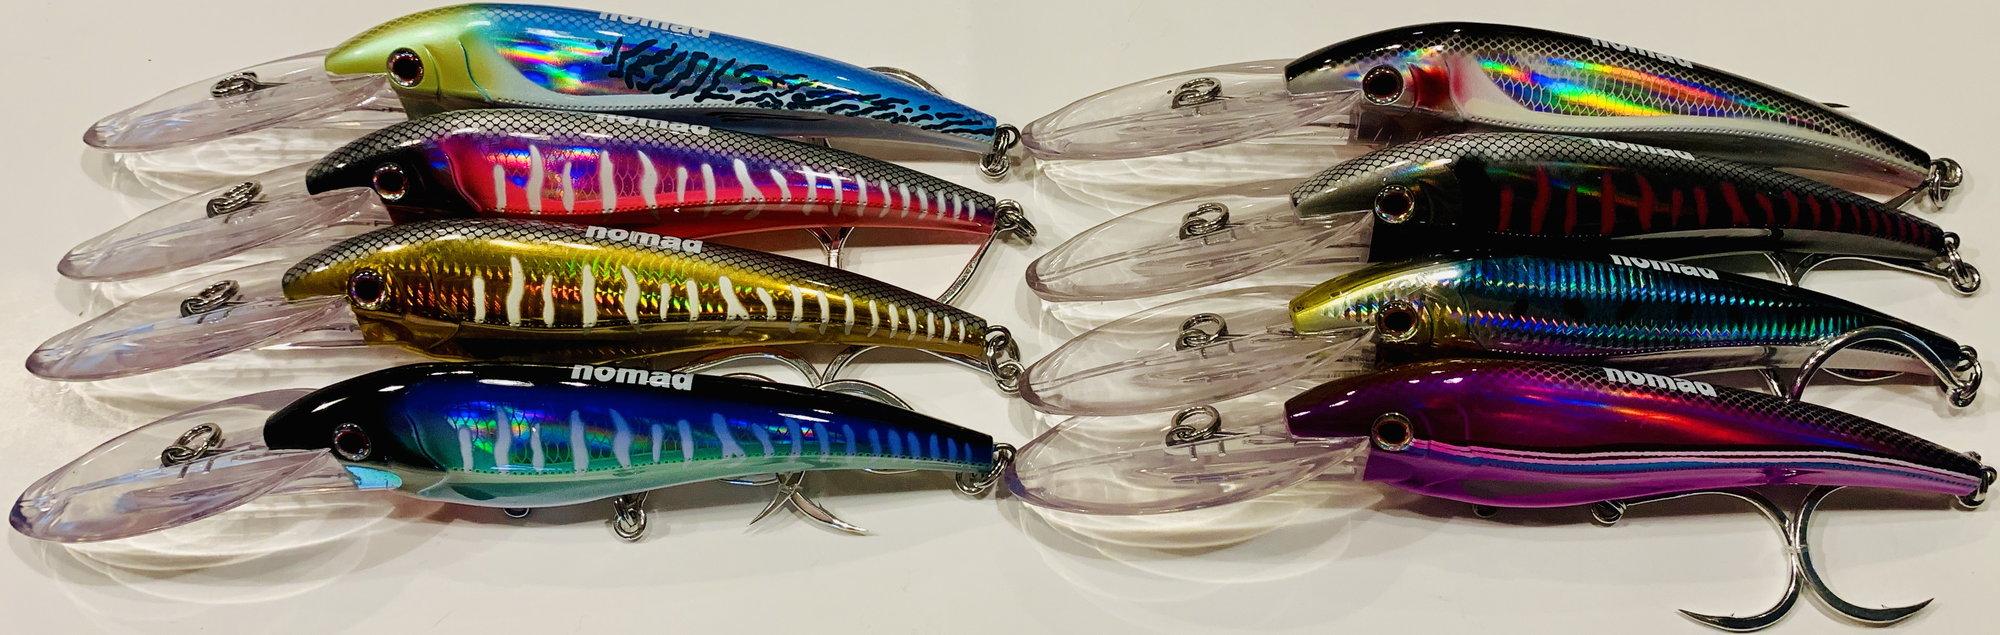 Nomad DTX Minnow review - Page 3 - The Hull Truth - Boating and Fishing  Forum